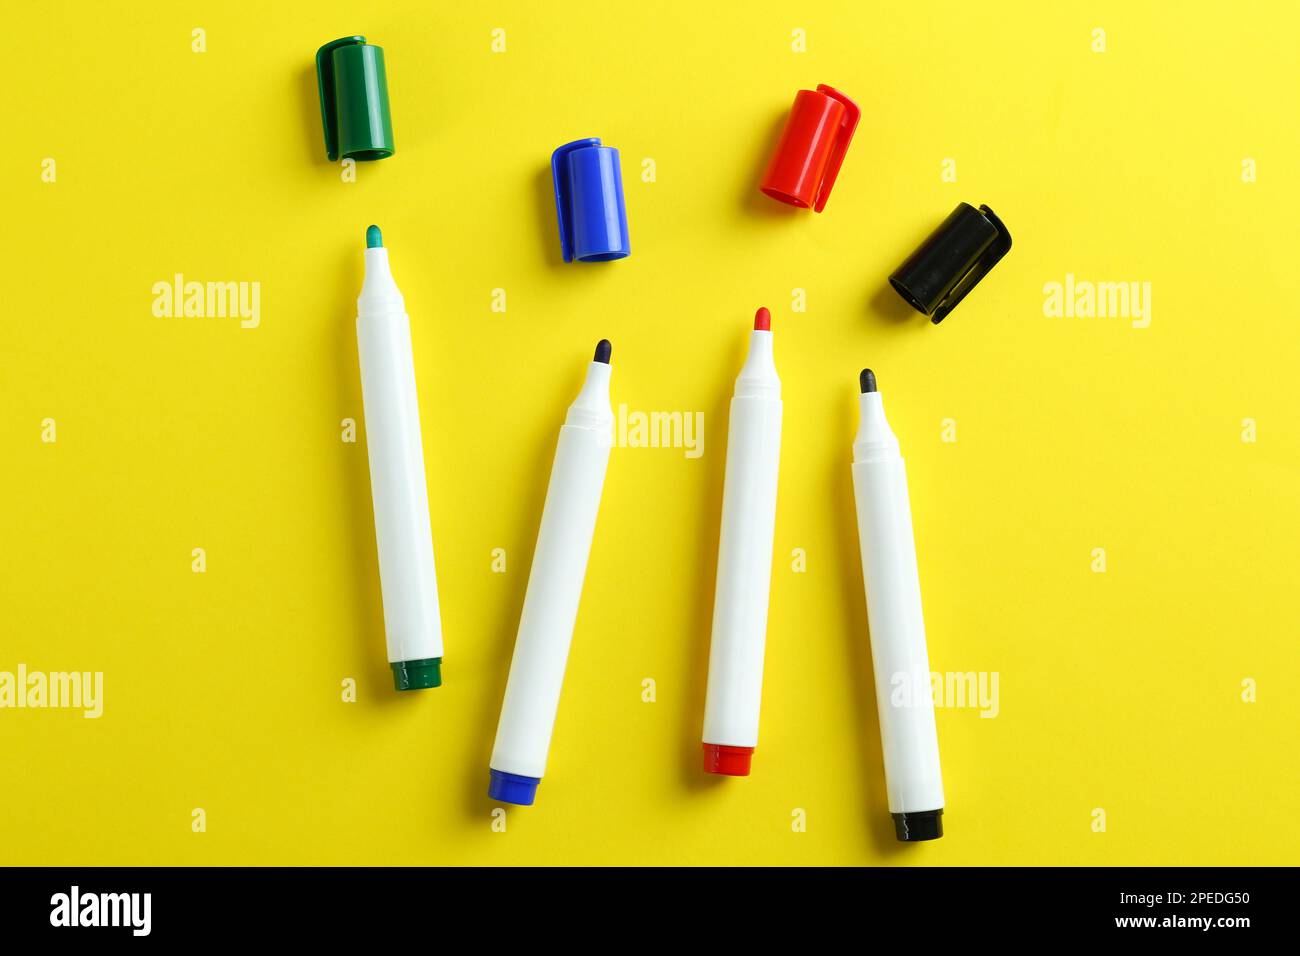 School Supplies And Coloring Pens Flat Lay On Yellow Background Stock Photo  - Download Image Now - iStock